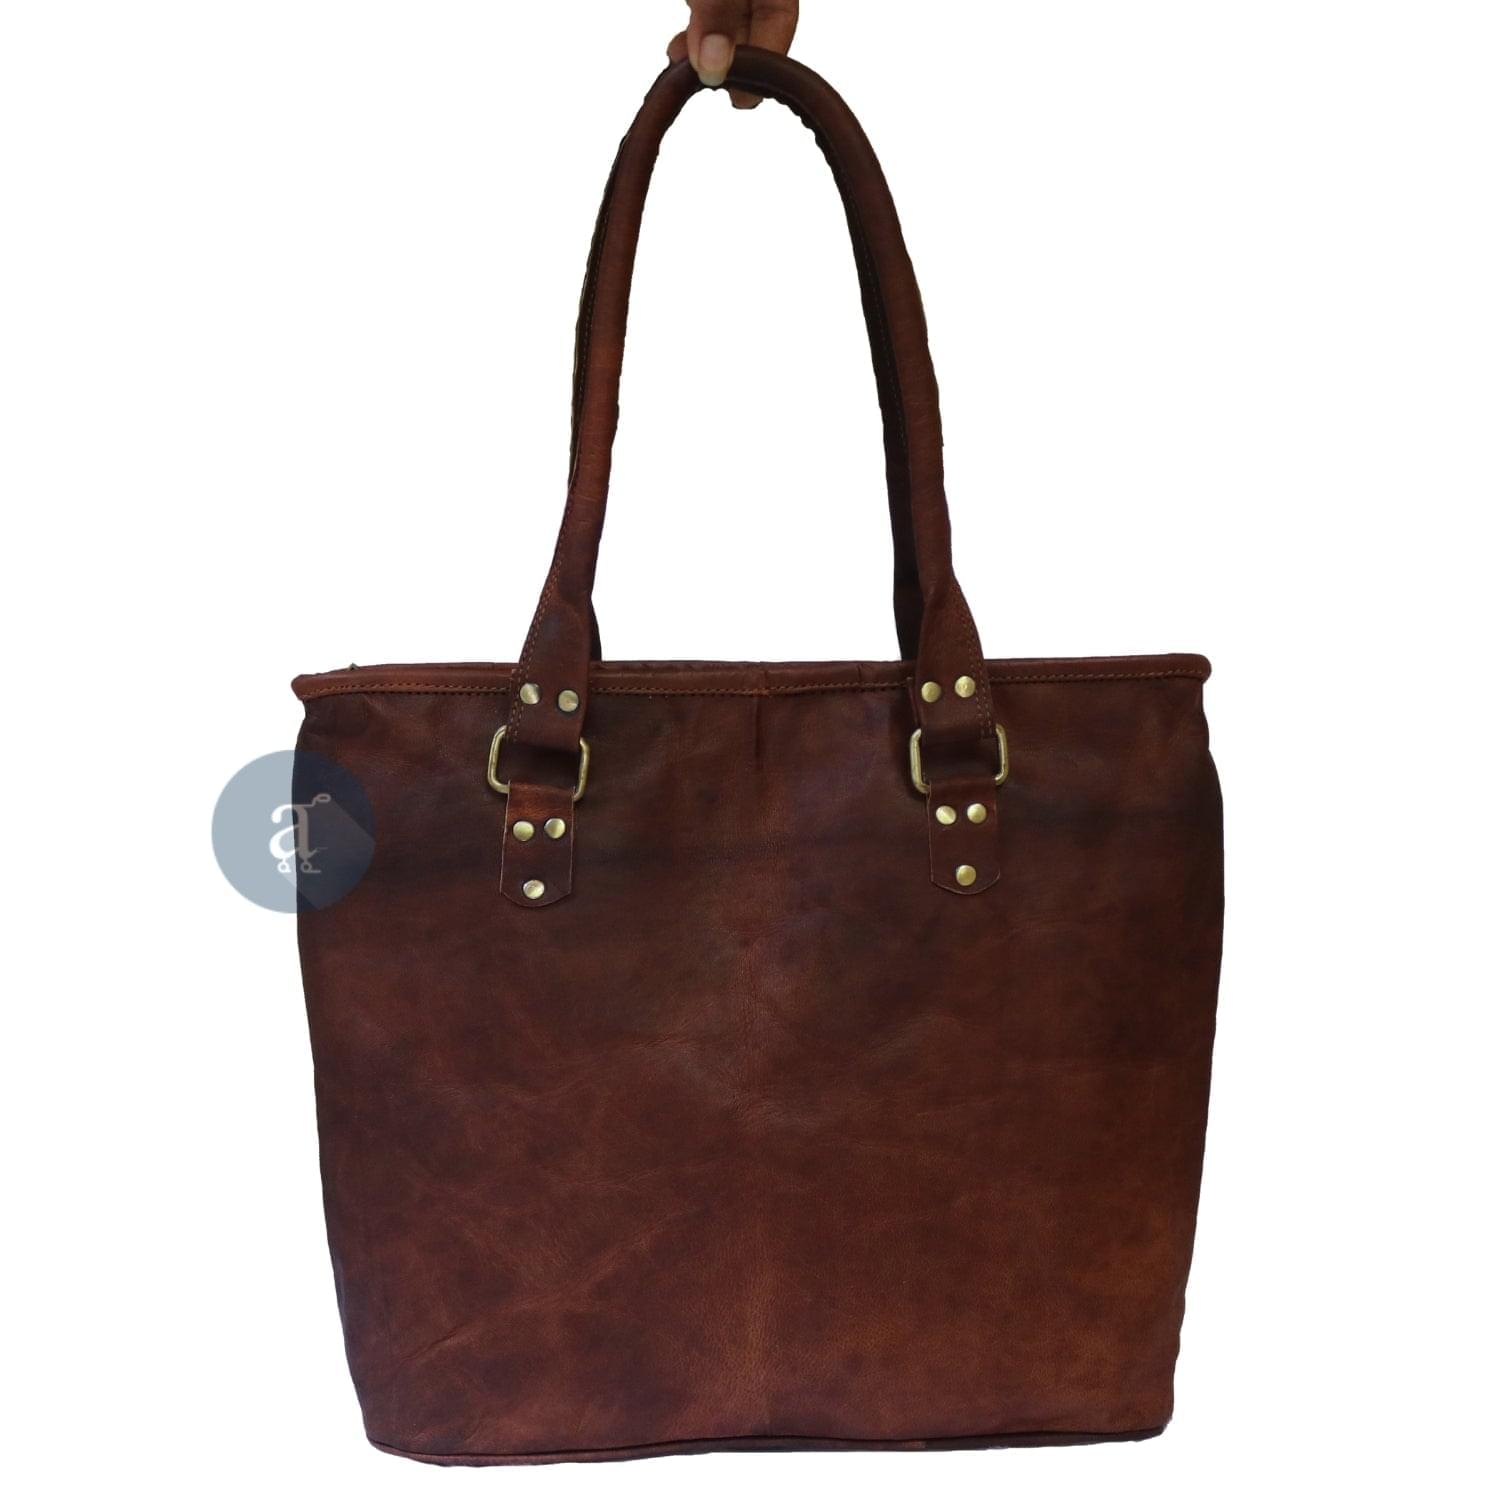 Brown Tote with Carrying Handle